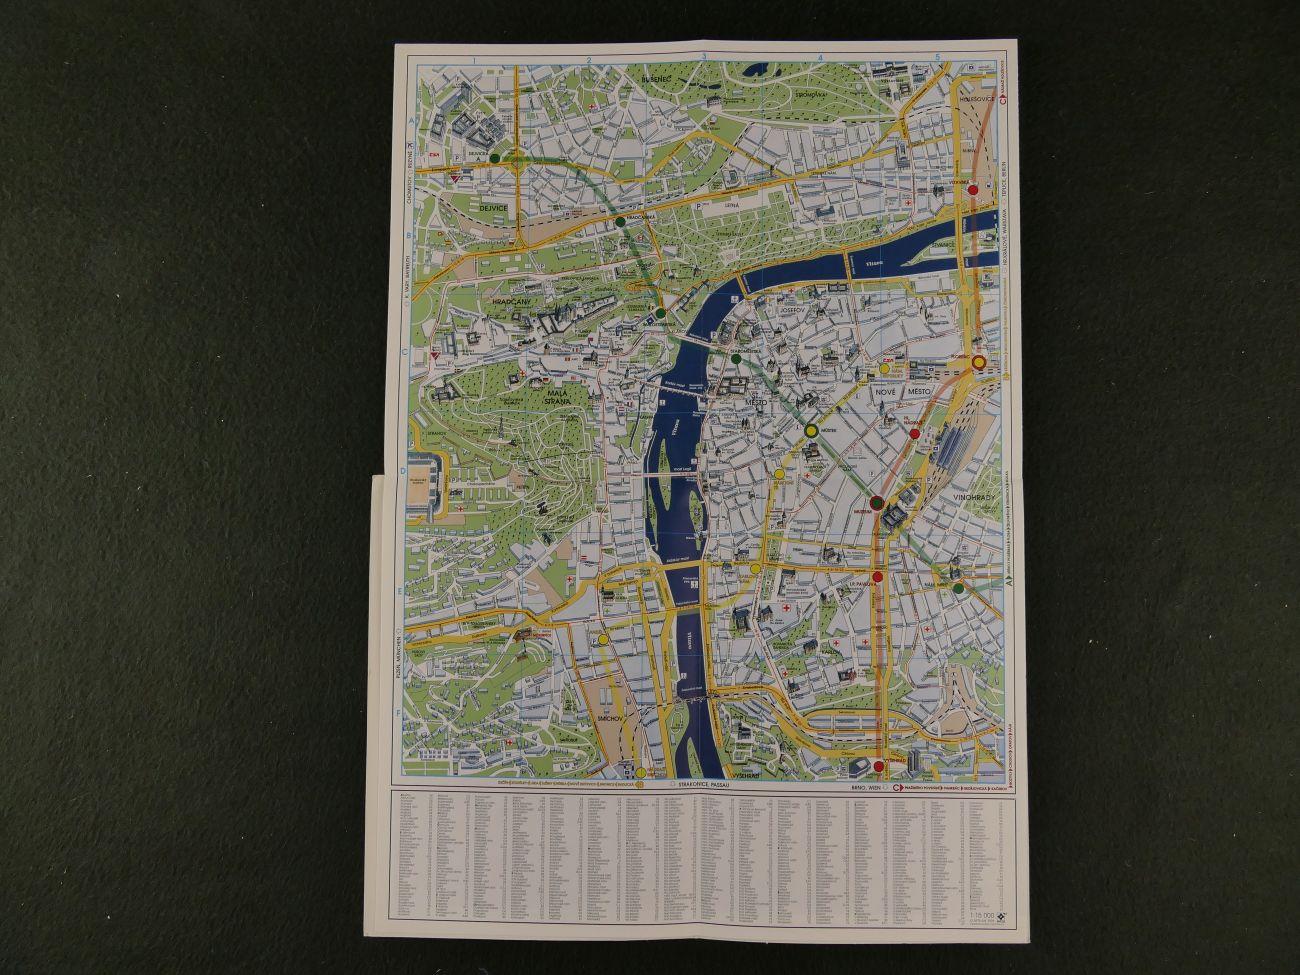 Rimal, Vladimir - Prague panoramic map, detailed plan of Prague Castle and area. Prague Castle. Guide to castle and gardens. (3 foto's)